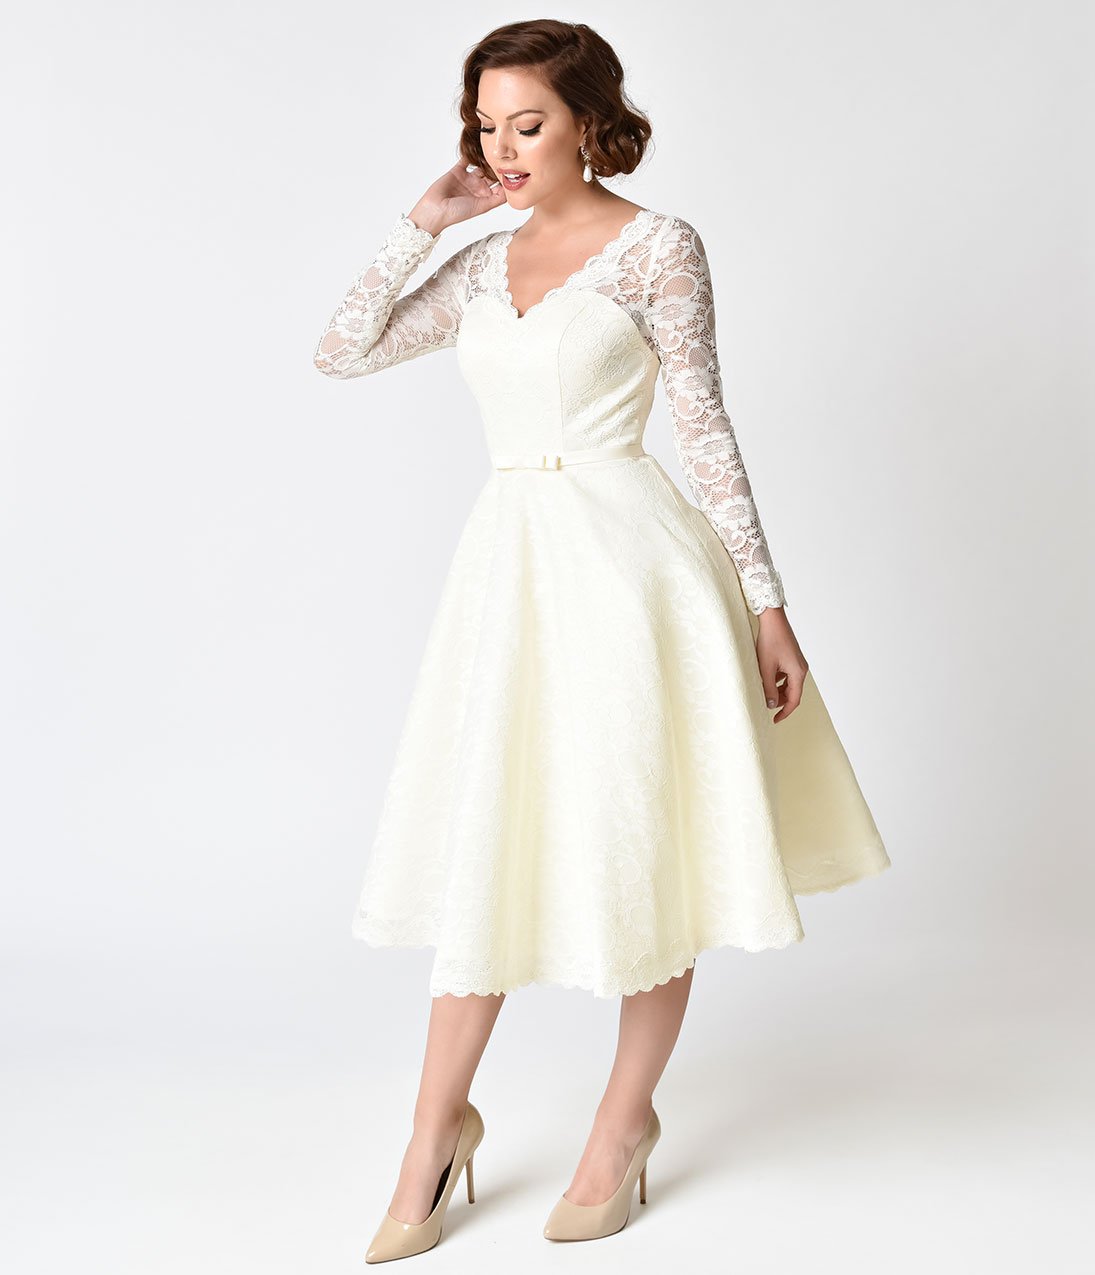 Get the ancient look with 1940’s style dresses